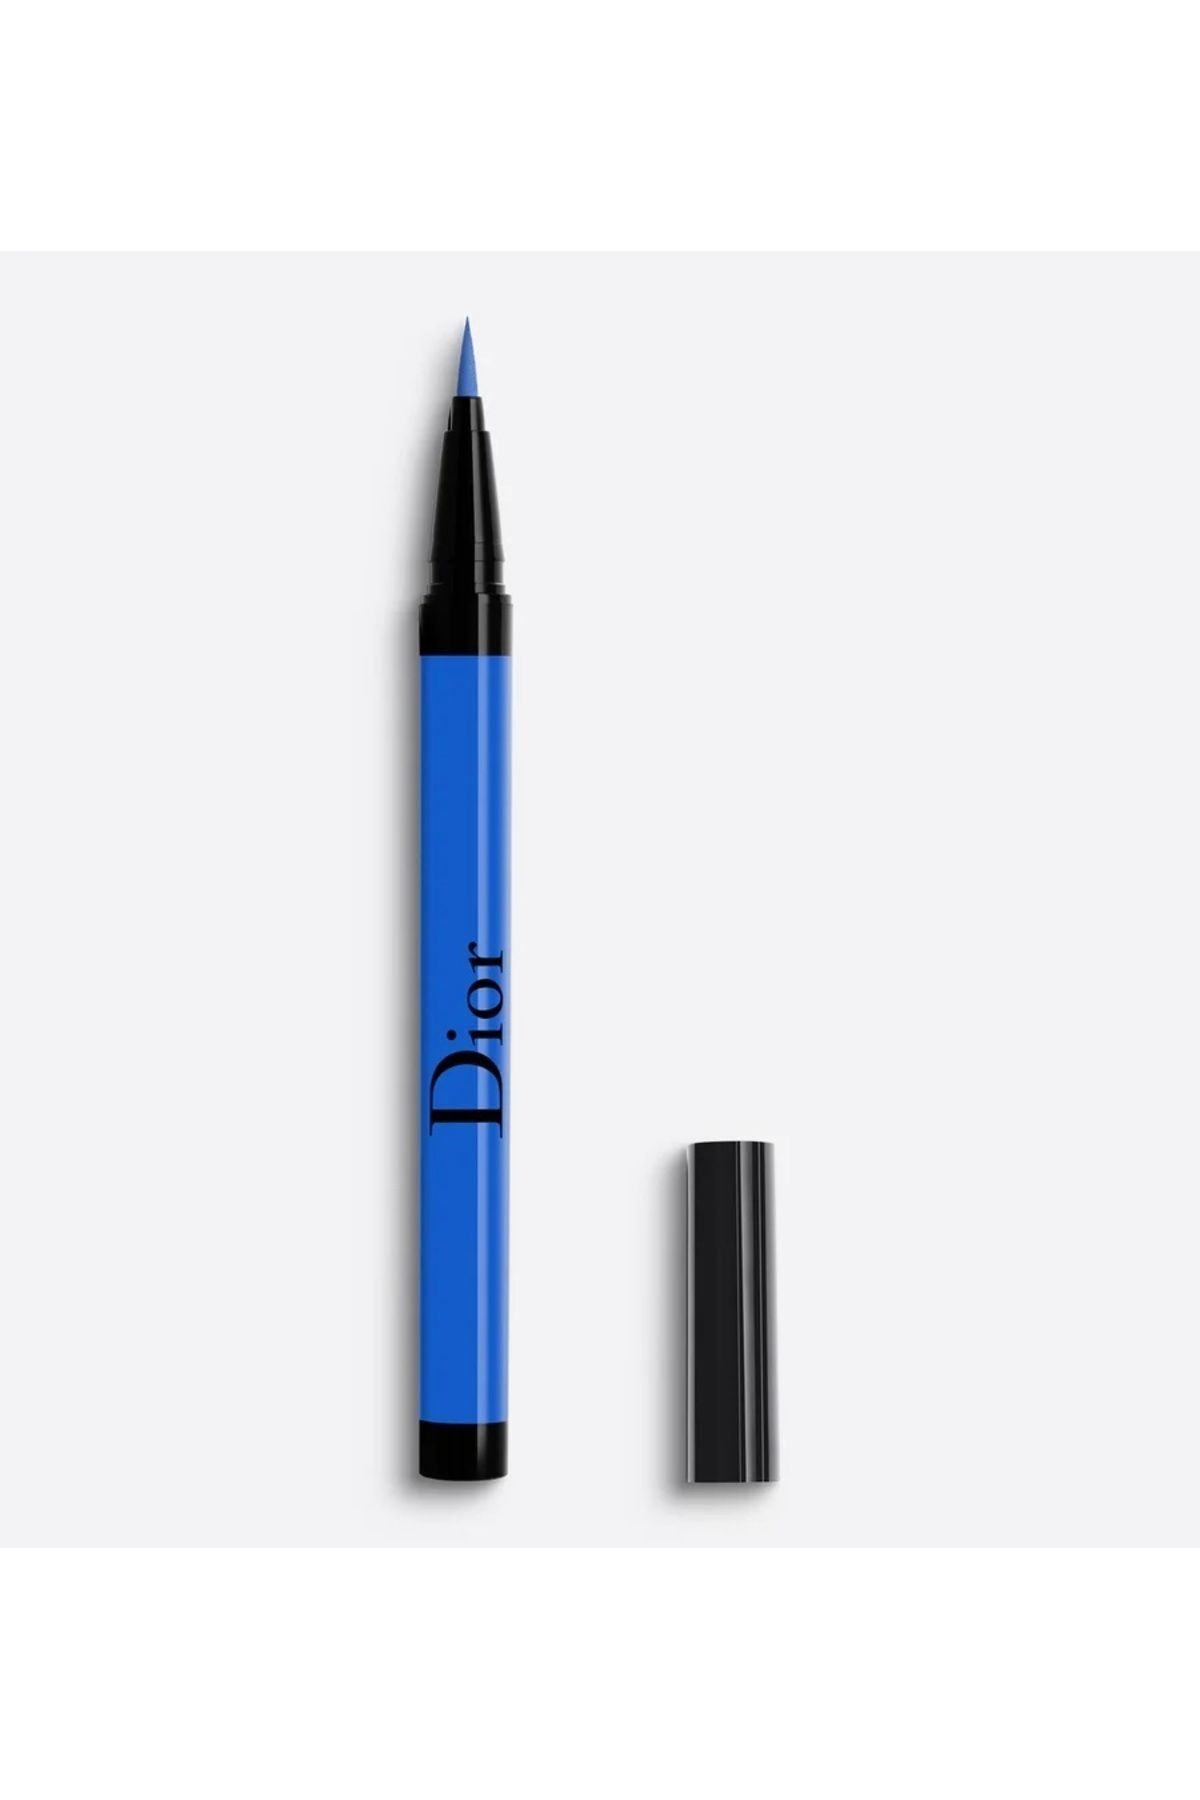 Dior 24 HOUR EFFECTİVE, LONG LASTİNG, INTENSELY PİGMENTED, SATİN-MATTE FİNİSH EYELİNER PSSN1979